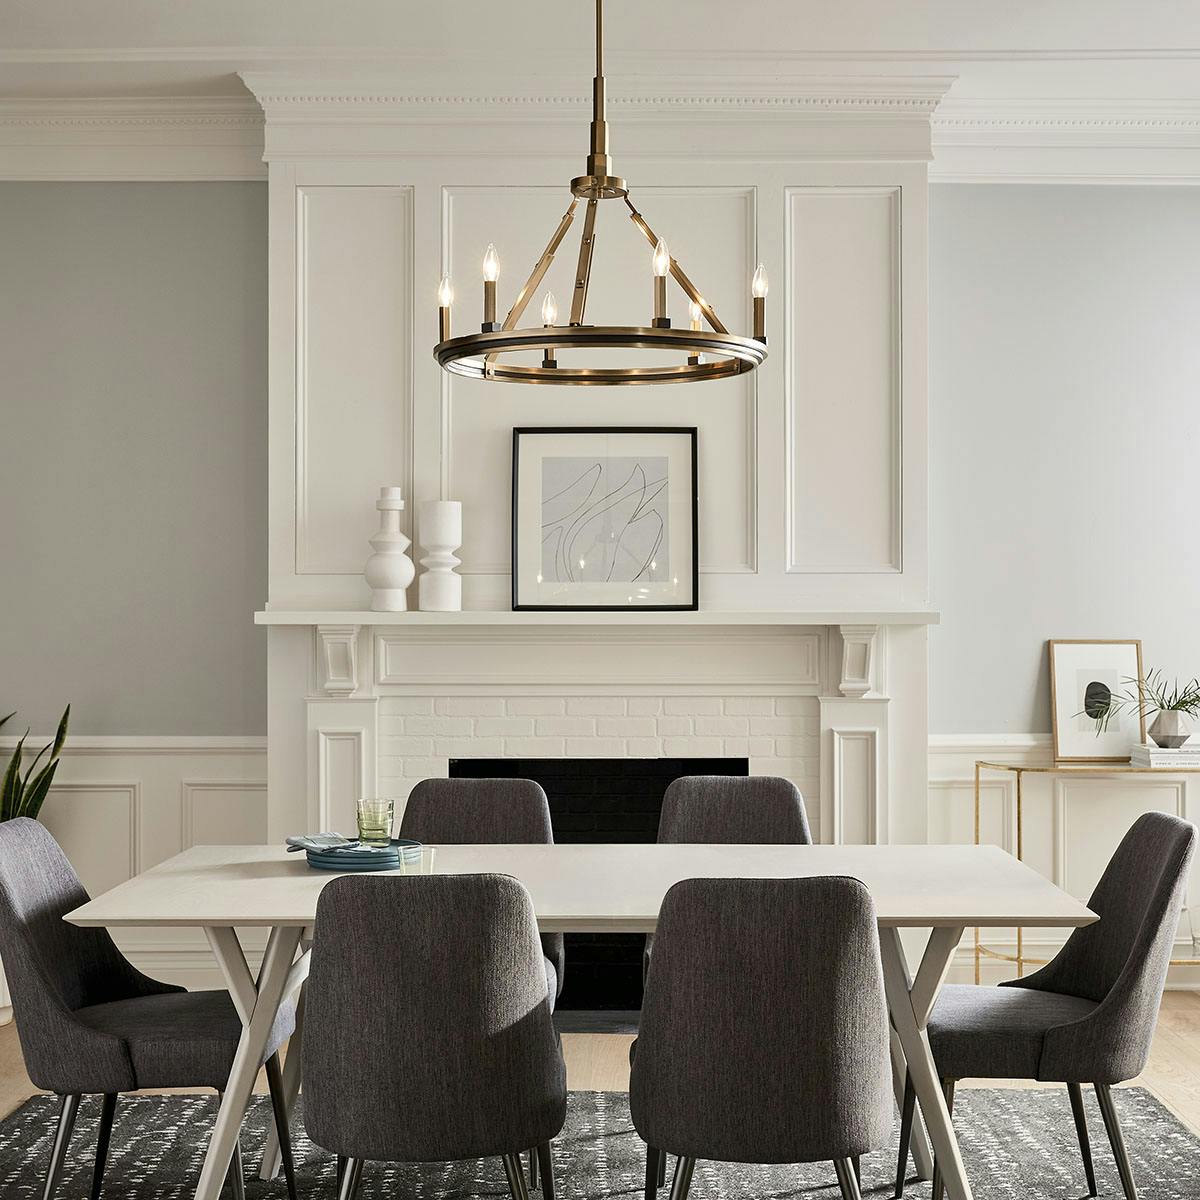 Day time Dining Room image featuring Emmala chandelier 52420BNB